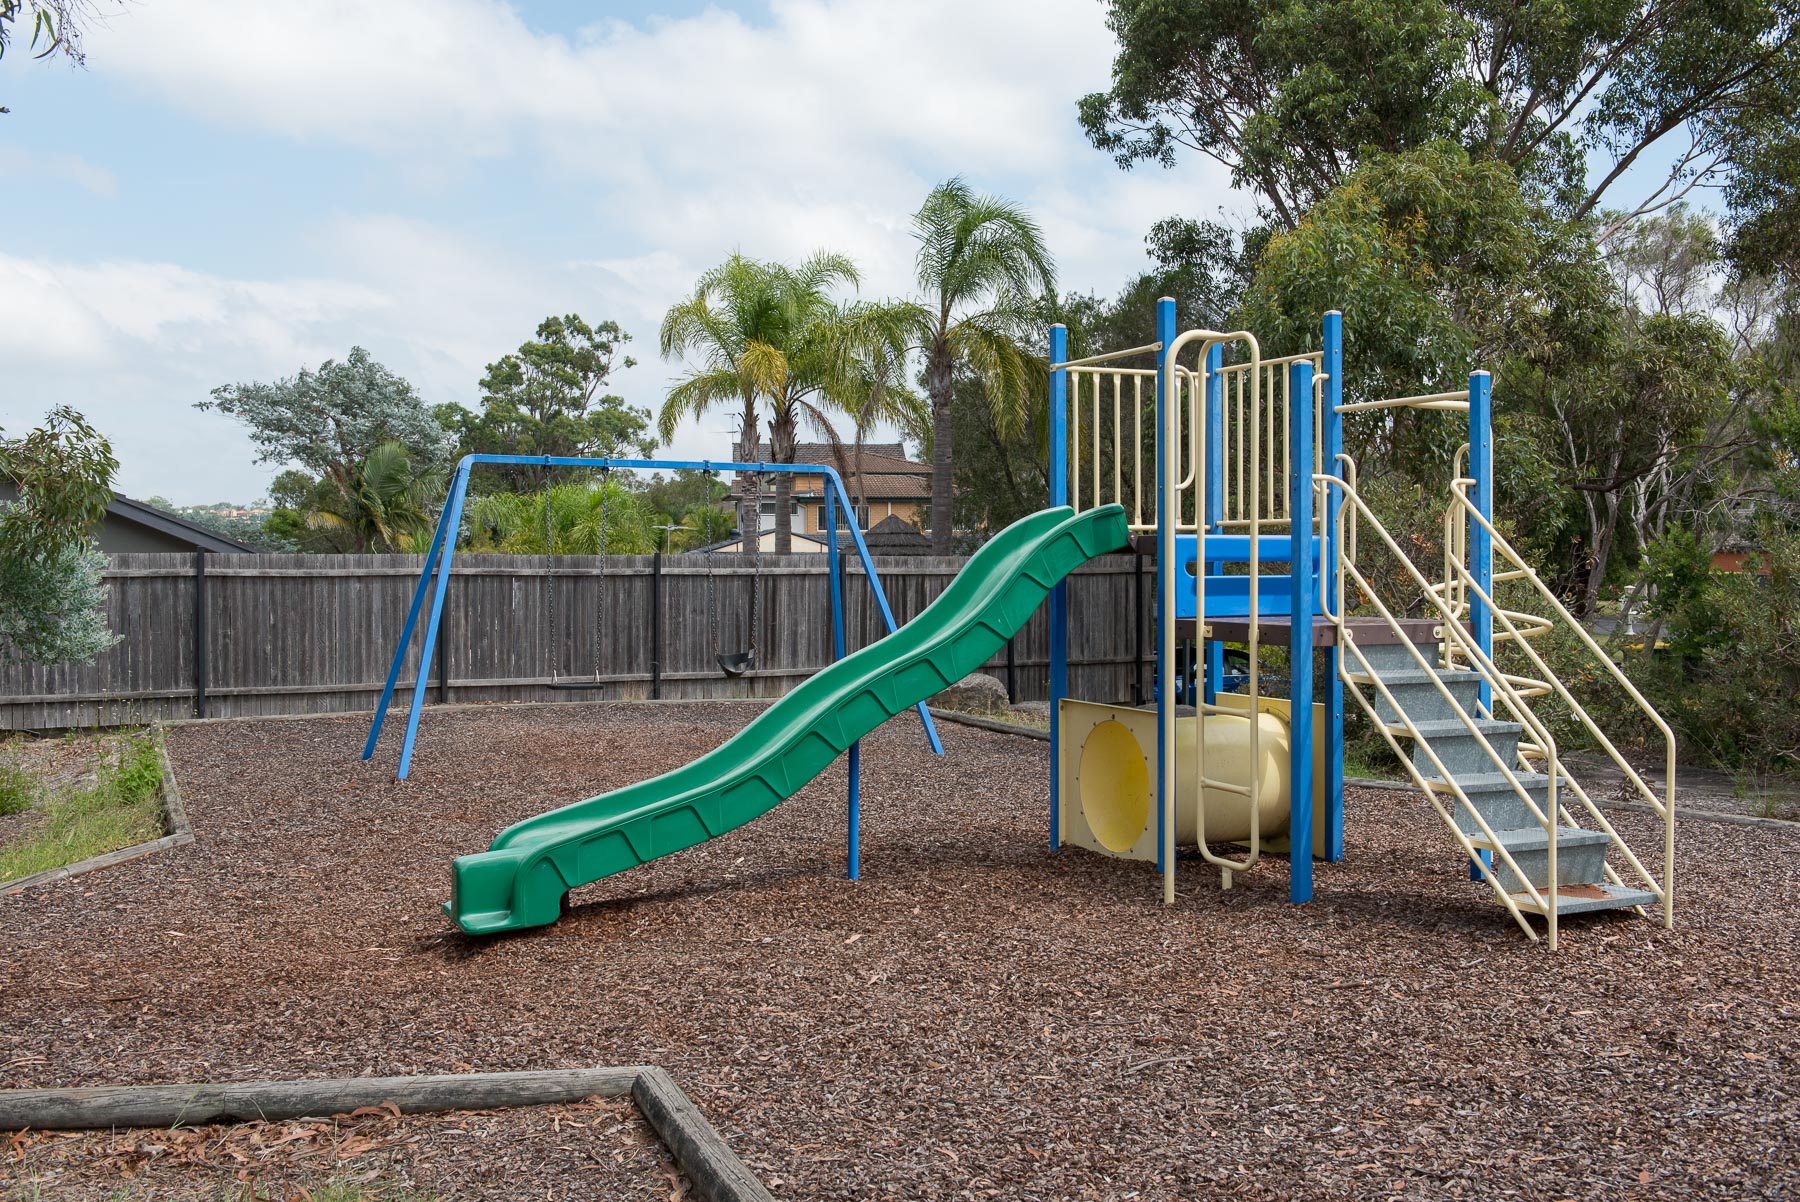 Playground with climbing equipment, slide and swings